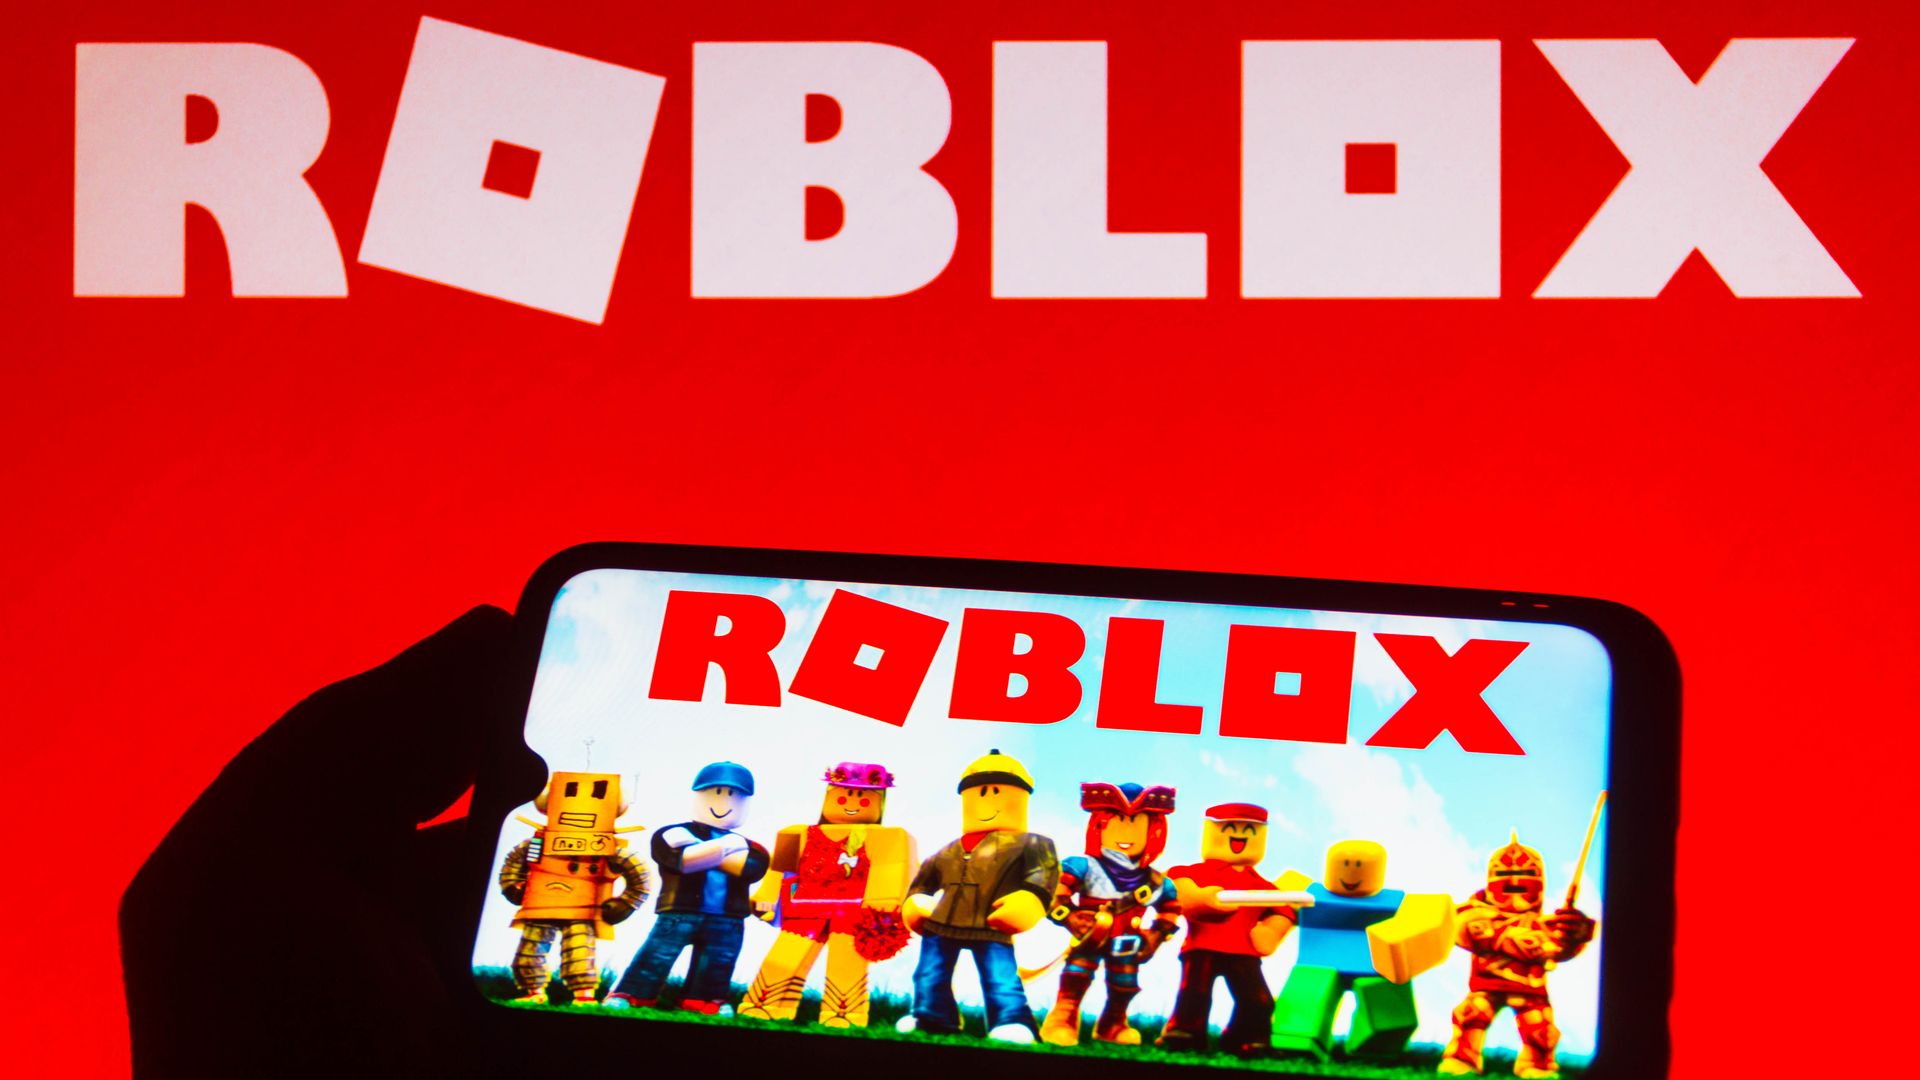 The Roblox logo with a phone having the app open